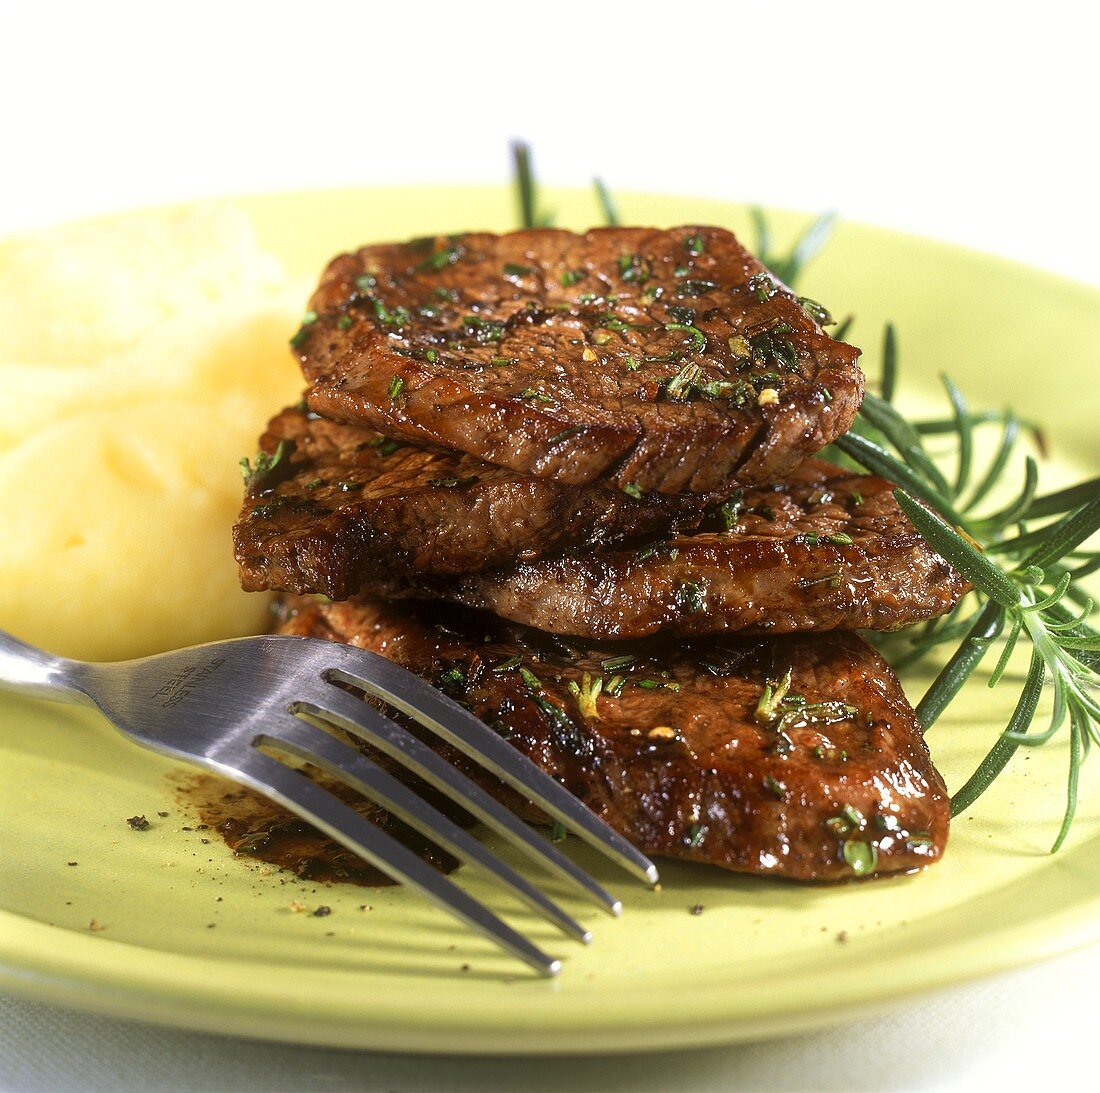 Minute steaks with mashed potato and rosemary